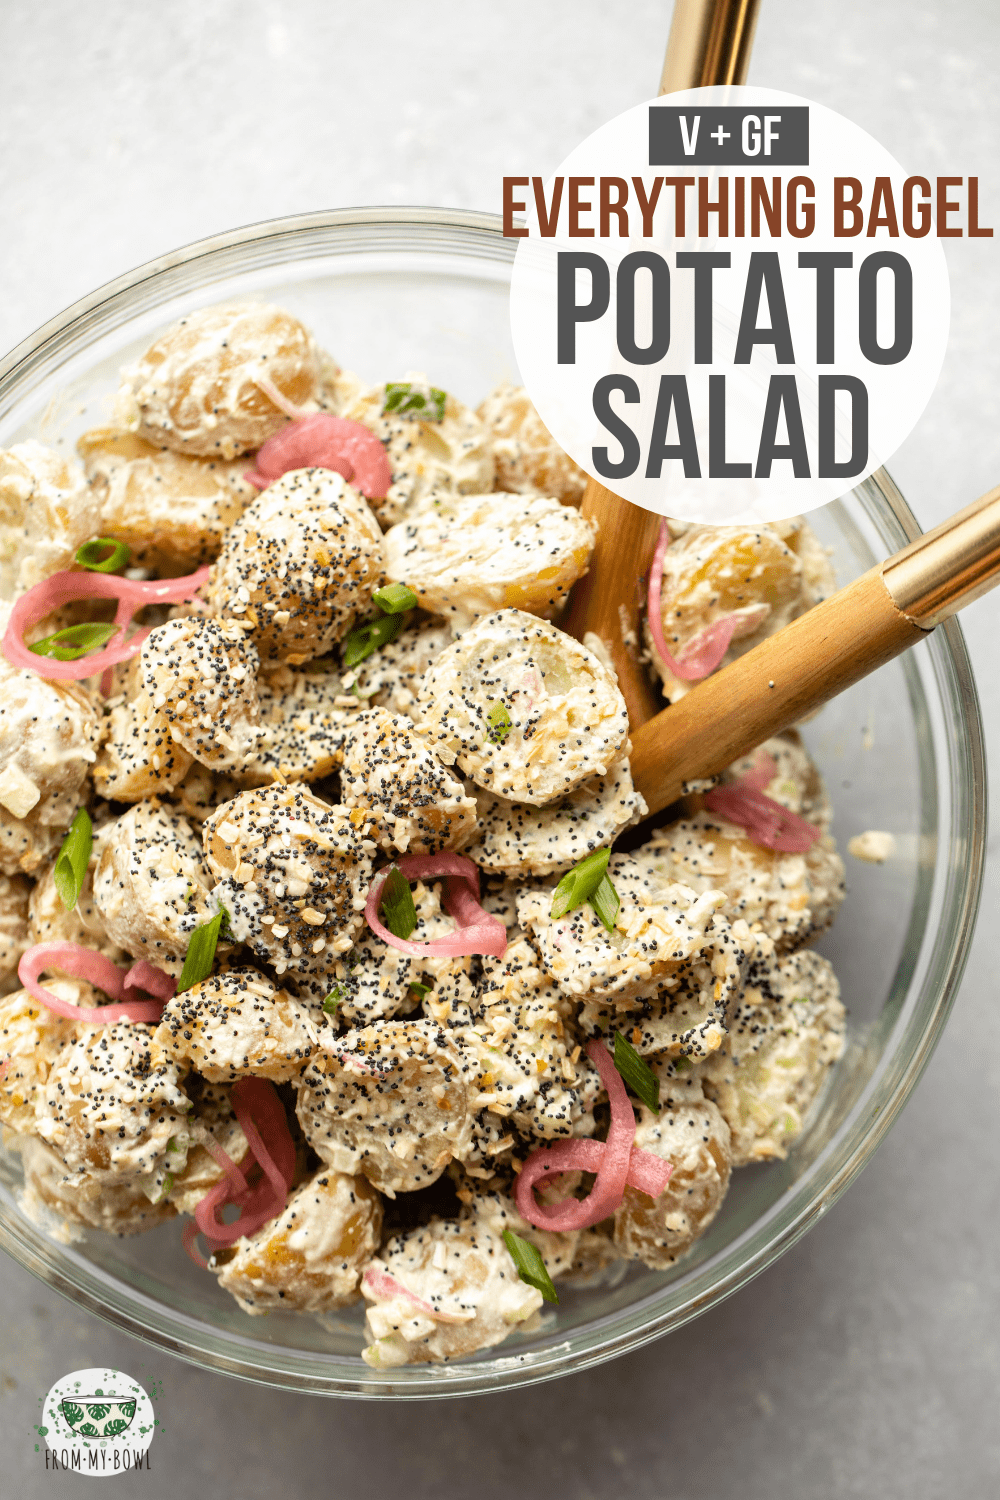 The Classic Potato Salad gets an upgrade with Pickled Red Onions and Everything Bagel Seasoning in this creamy, tangy, and delicious plant-based recipe. #potatosalad #everythingbagel #vegan #plantbased #oilfree | frommybowl.com